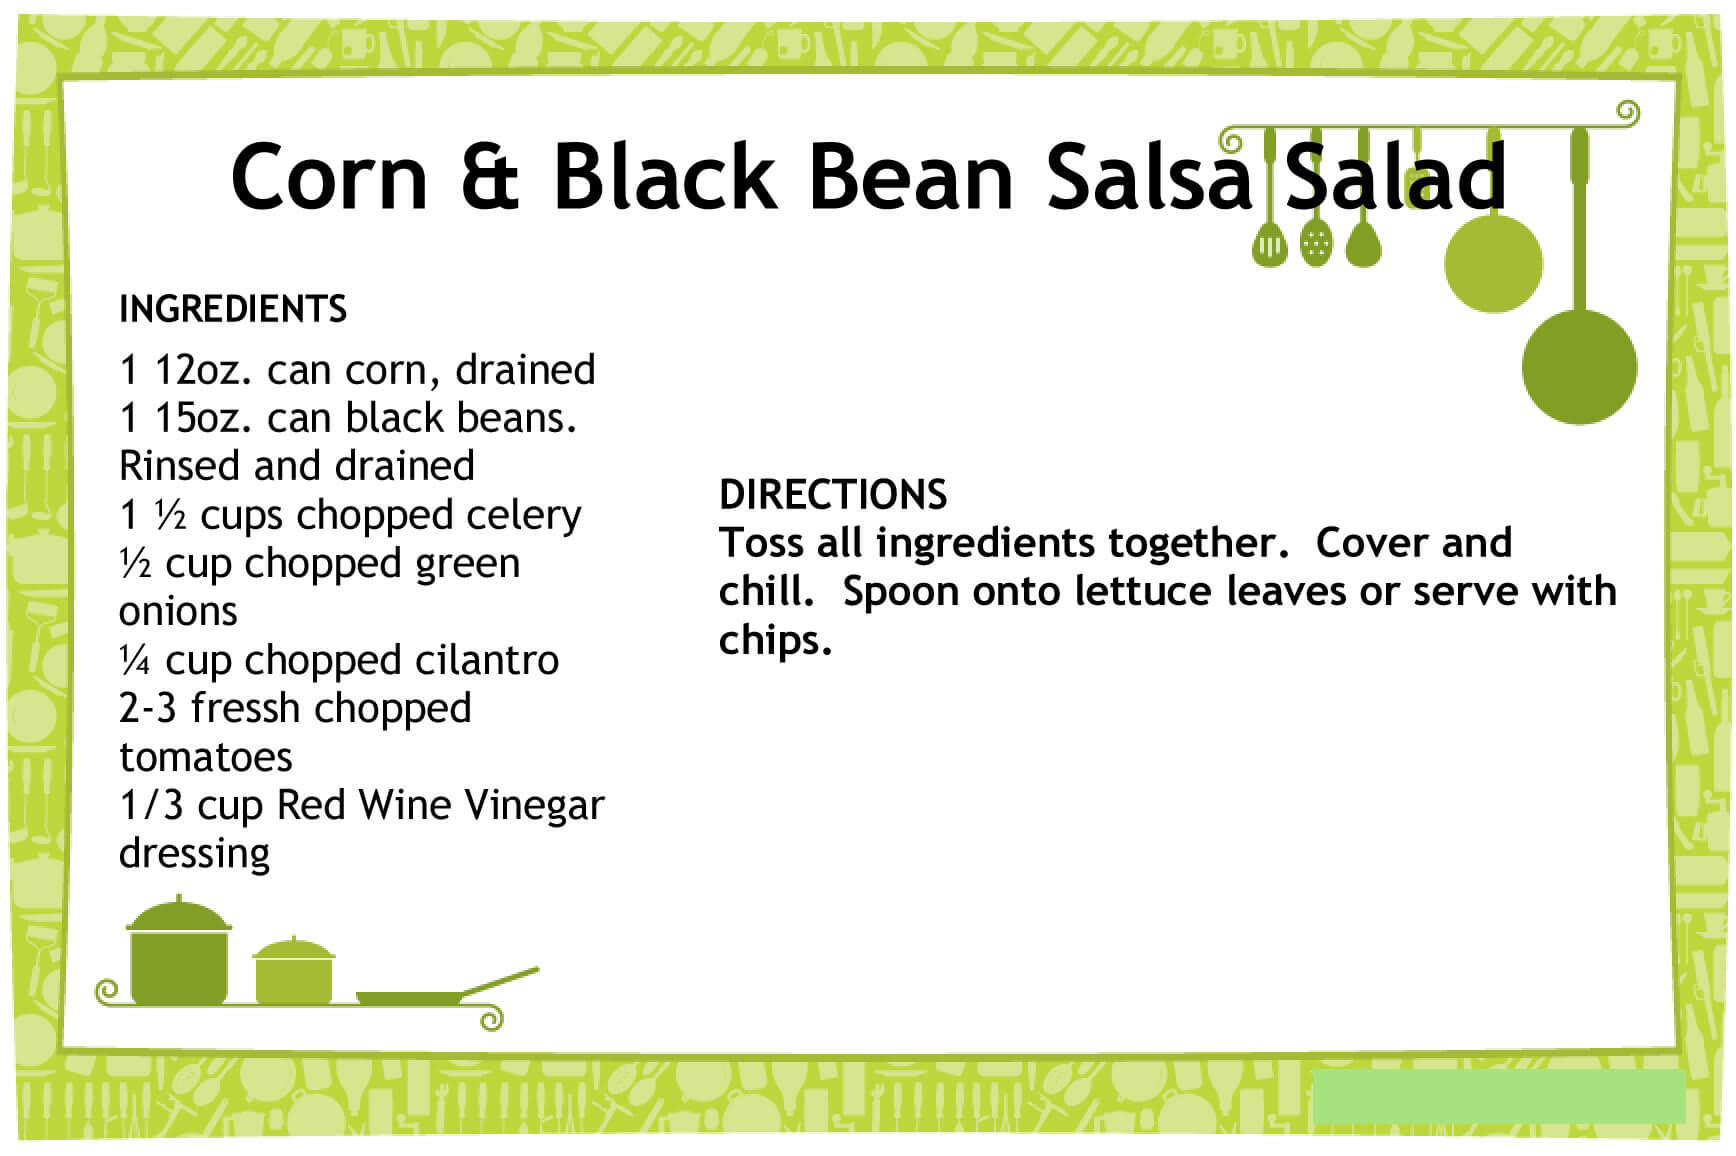 Gallery For Gt Recipe Template For Microsoft Word Mesa 39 S Pertaining To Microsoft Word Recipe Card Template